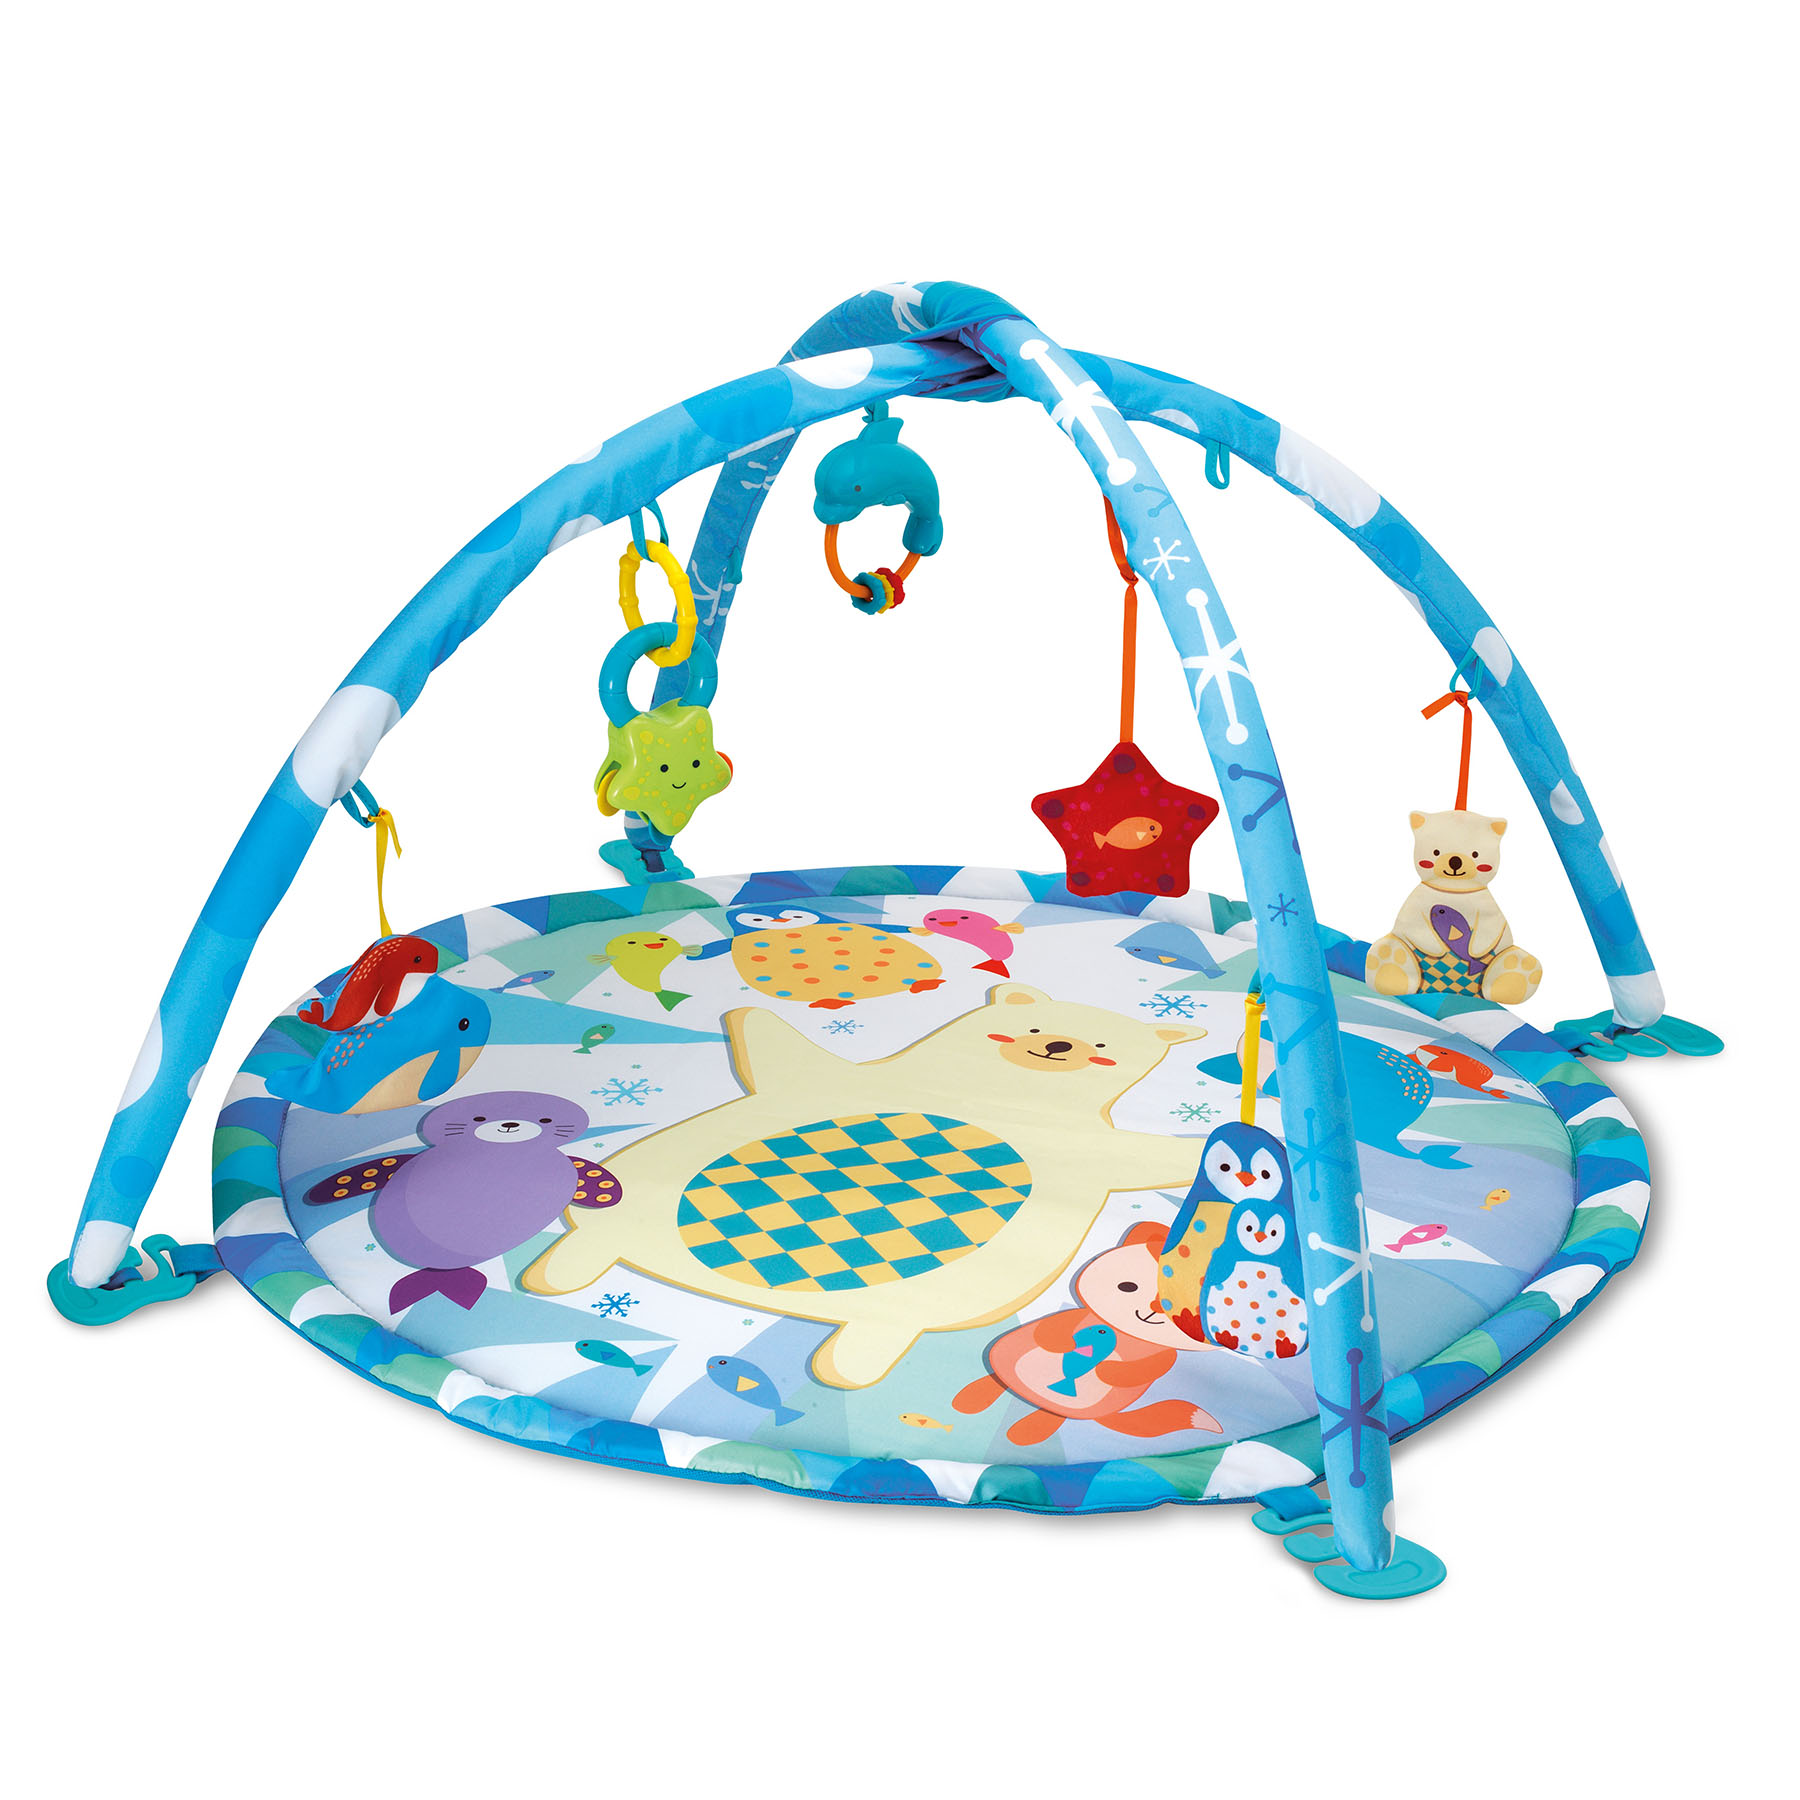 Little Virtuoso Neptune's Infant Playmat  With Lights, Sounds and Music  (Newborn to 2 Years) - image 1 of 6